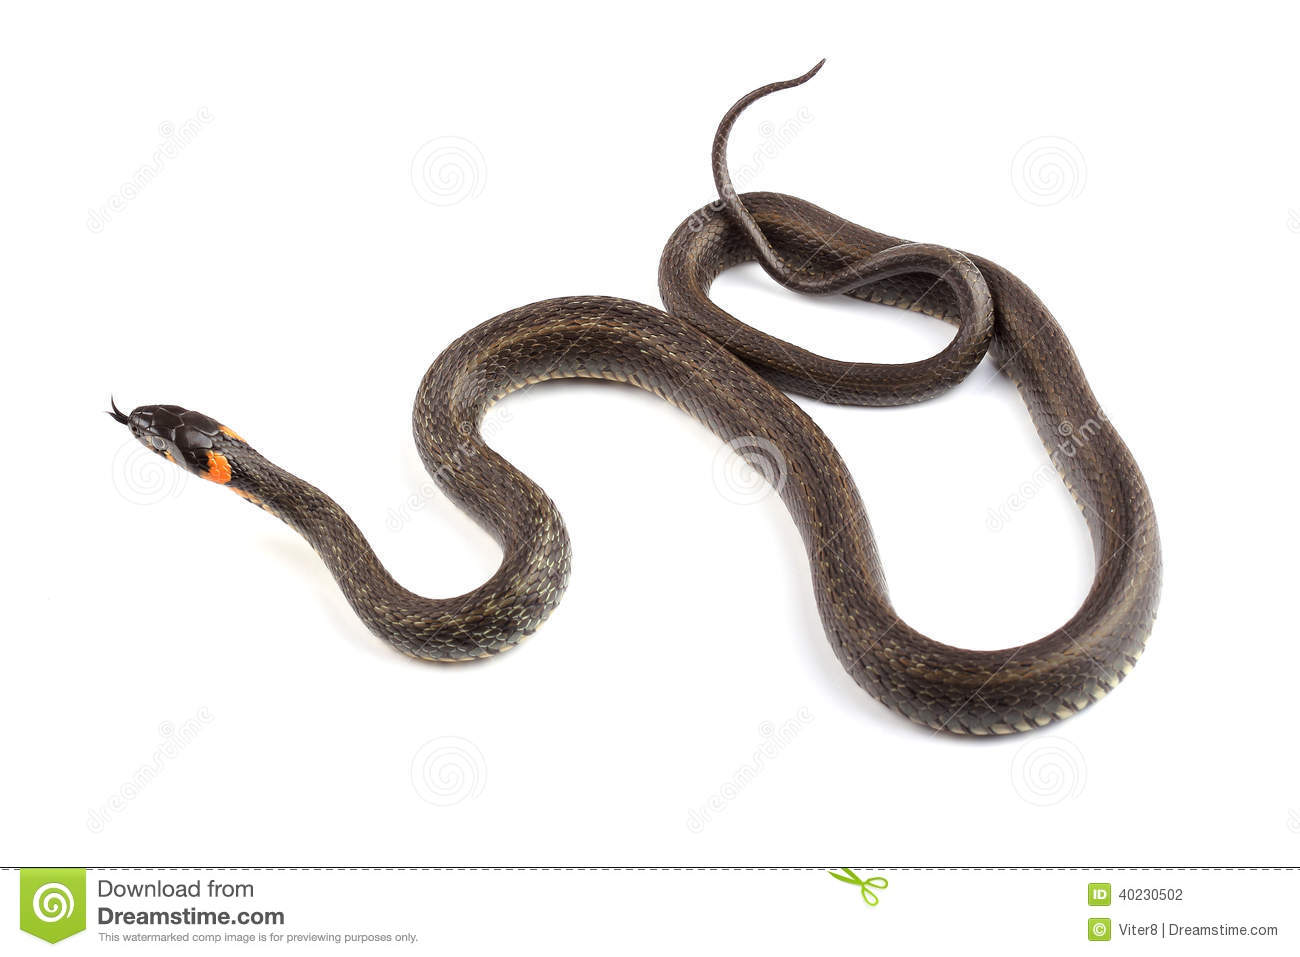 Grass Snake clipart #5, Download drawings